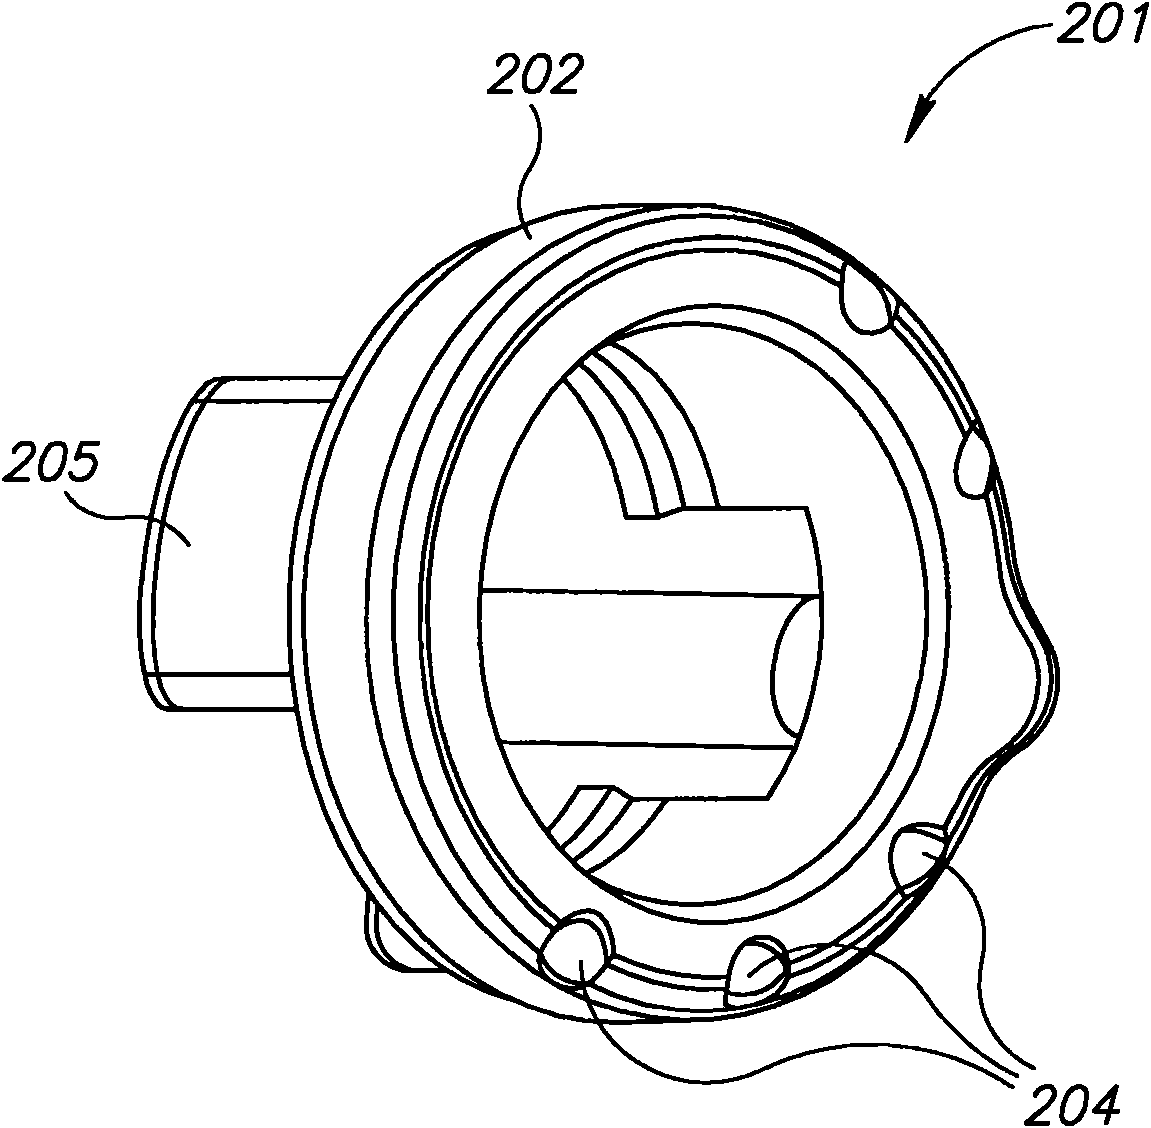 Endoscopic device with fluid cleaning